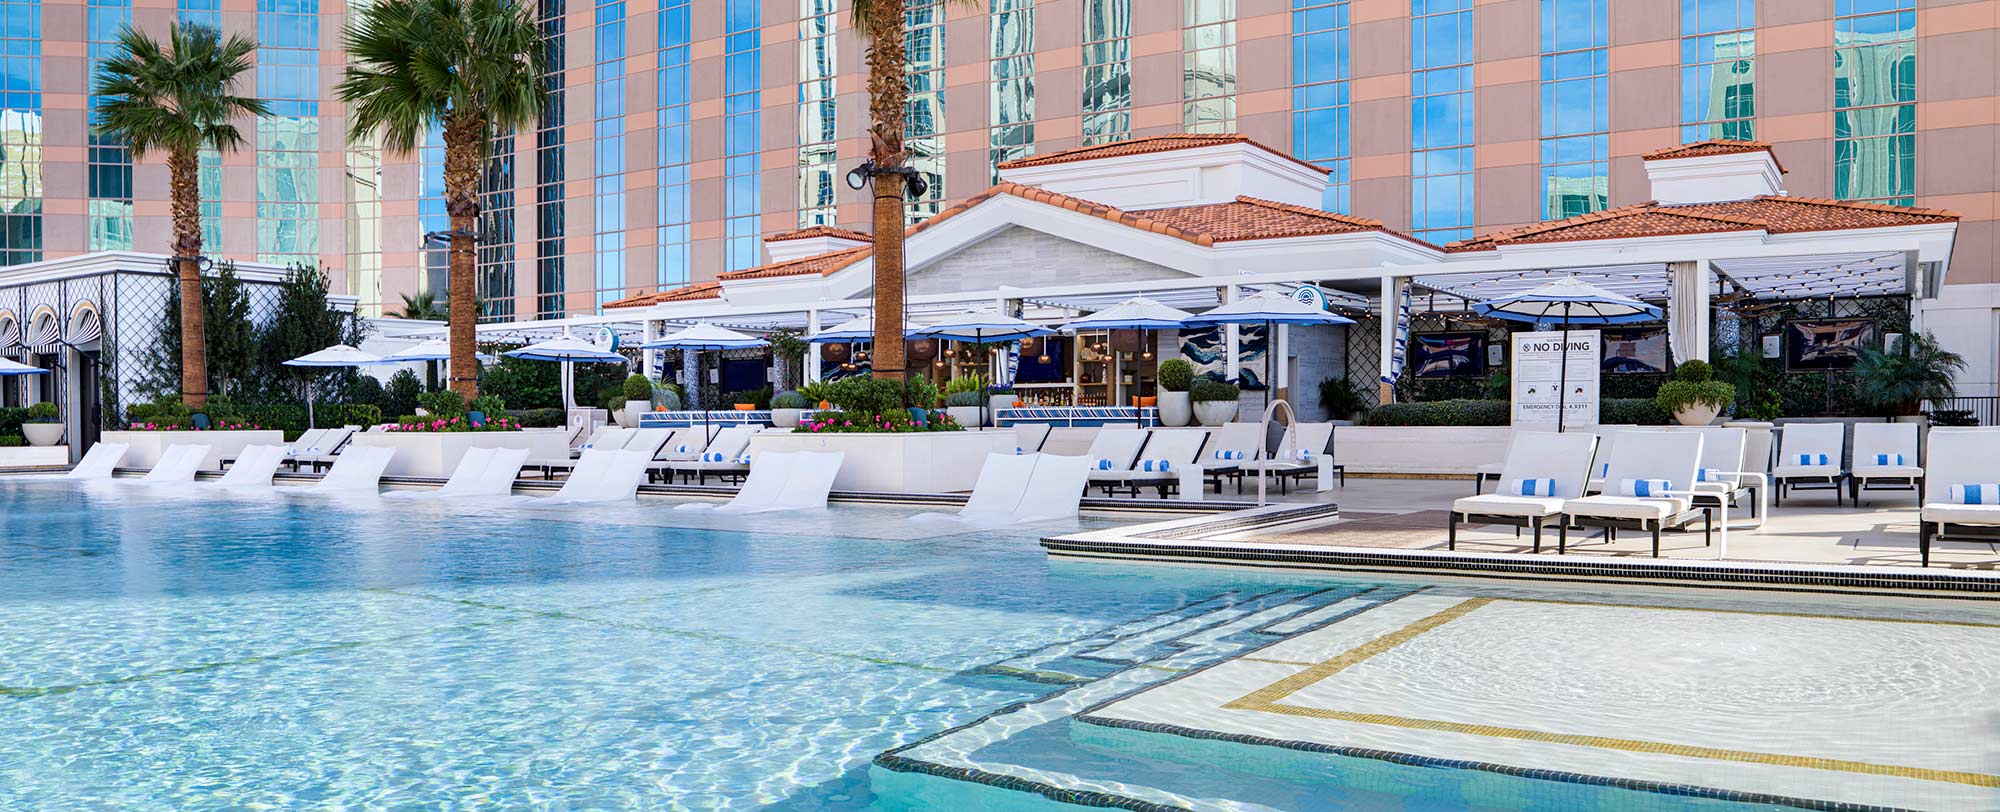 Dive Into Summer At The Venetian